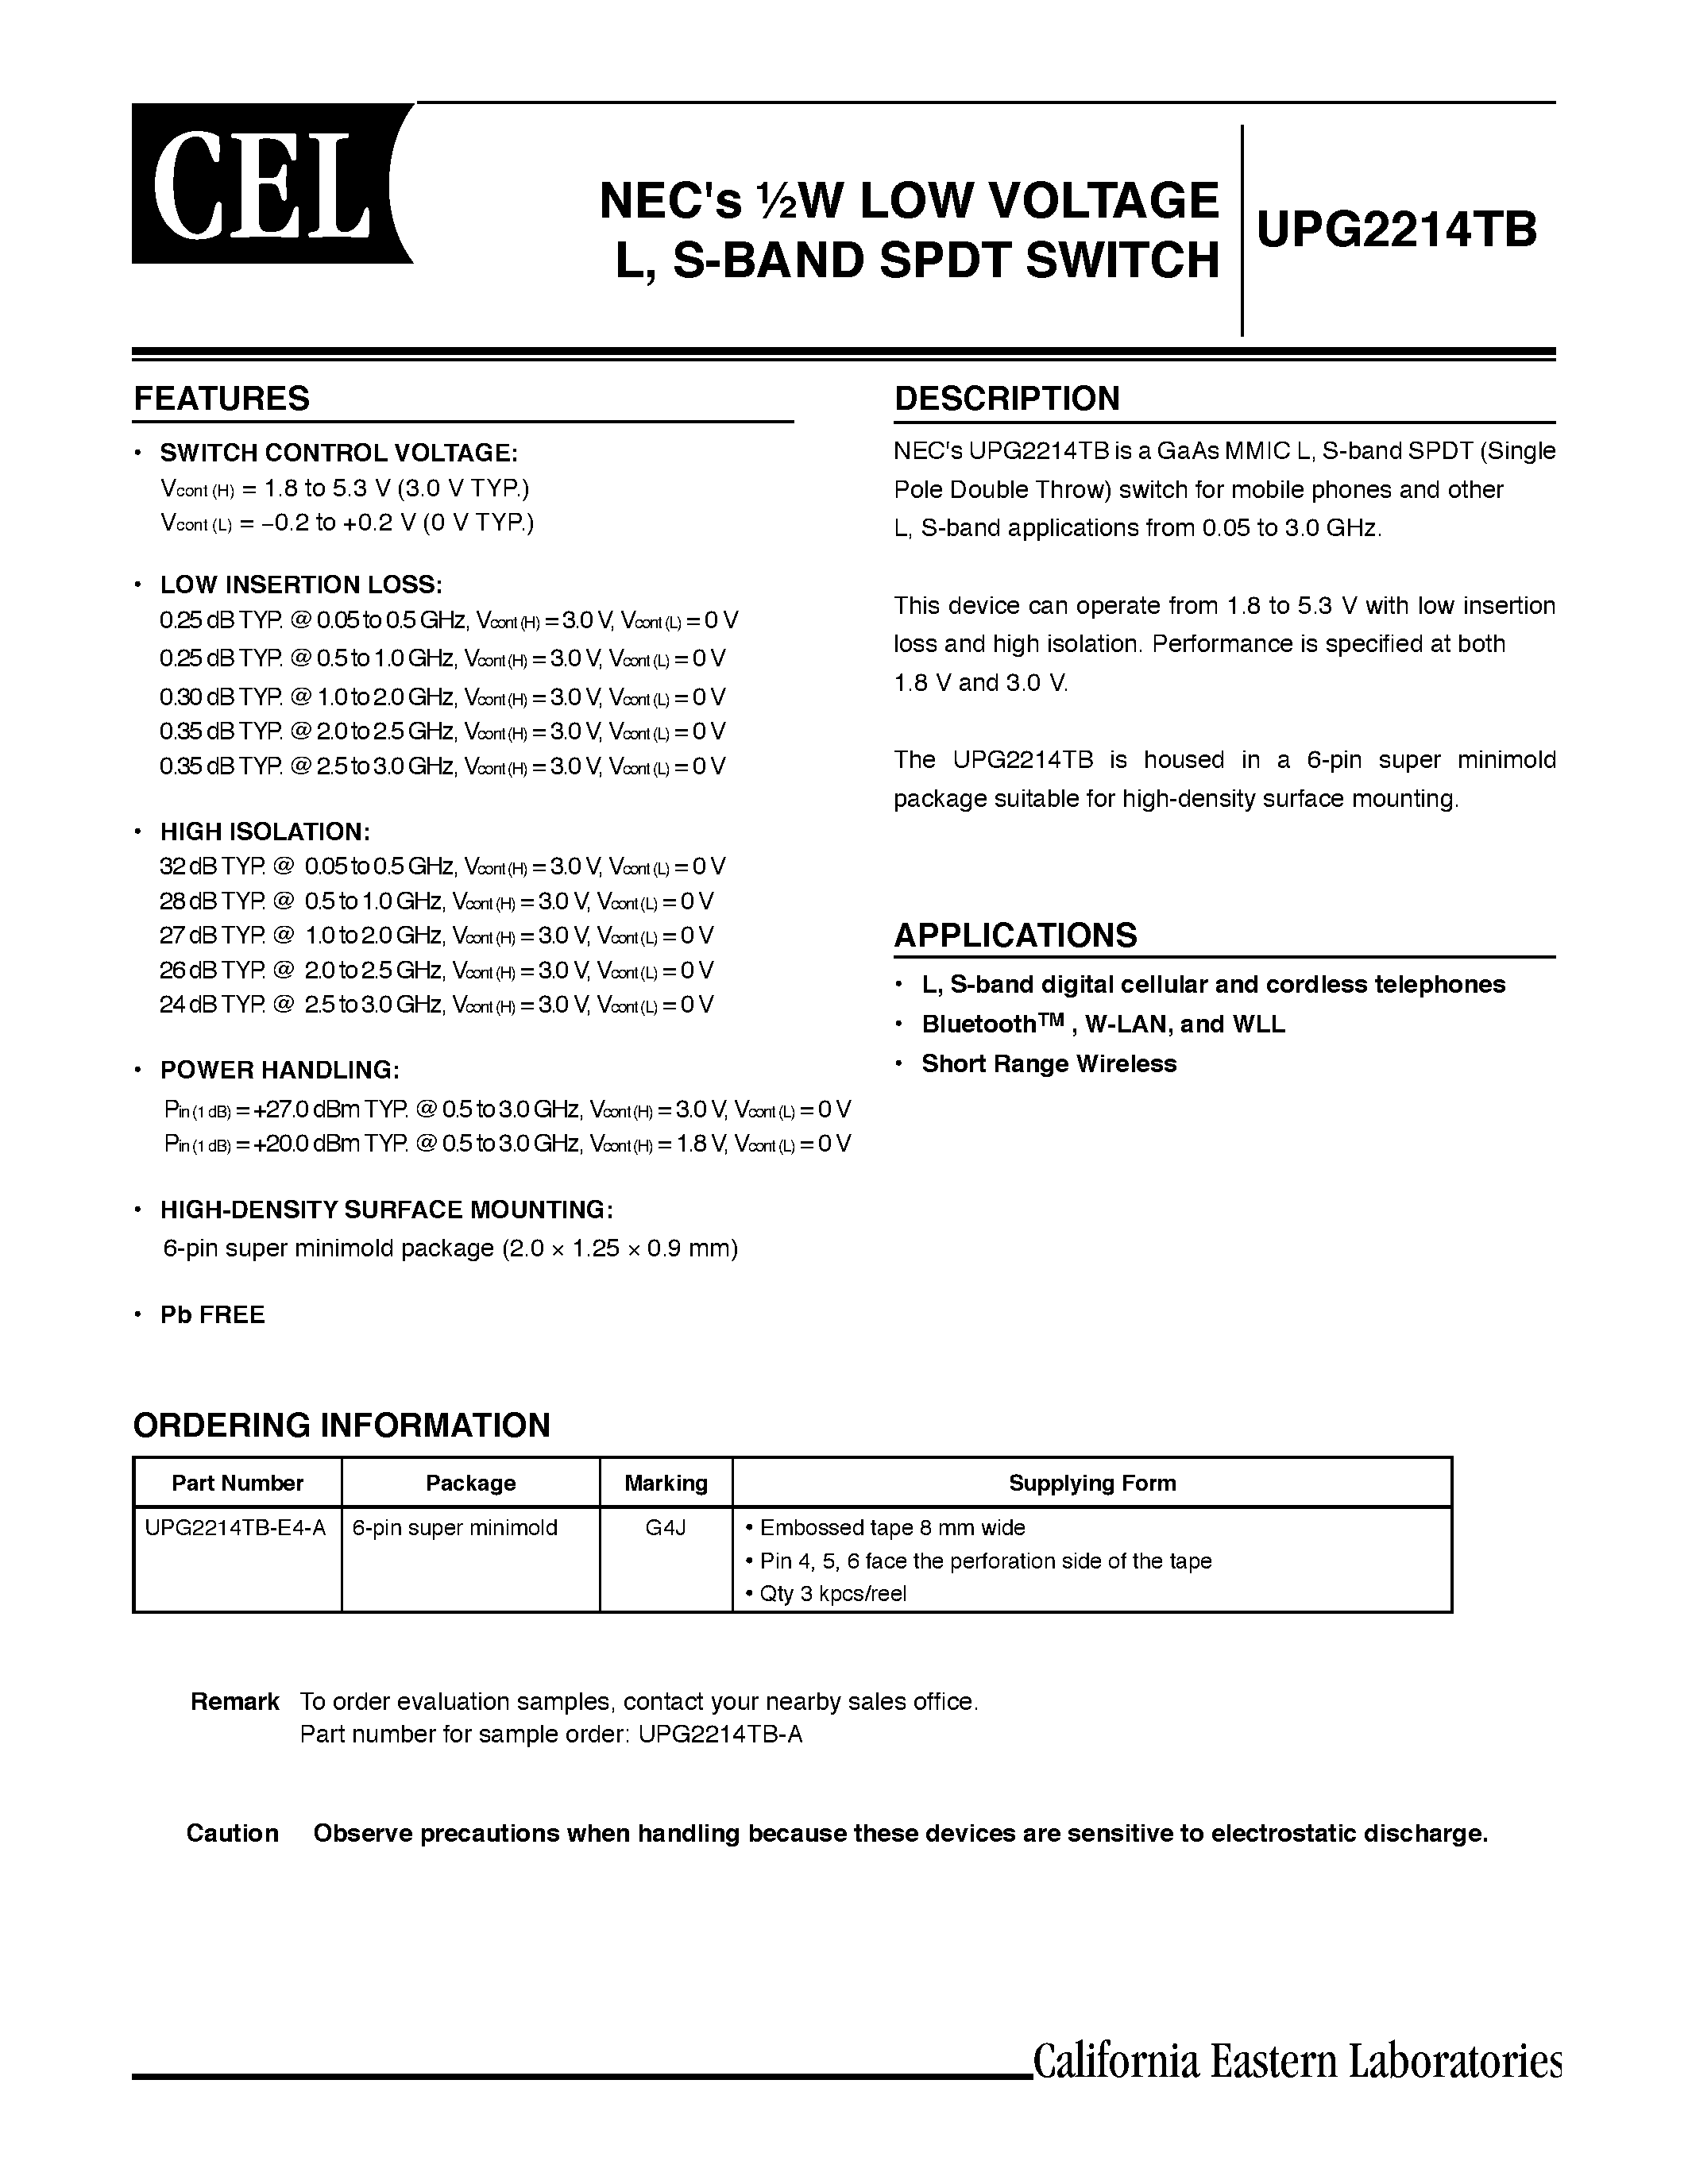 Datasheet UPG2214TB-E4-A - NECs W LOW VOLTAGE L/ S-BAND SPDT SWITCH page 1